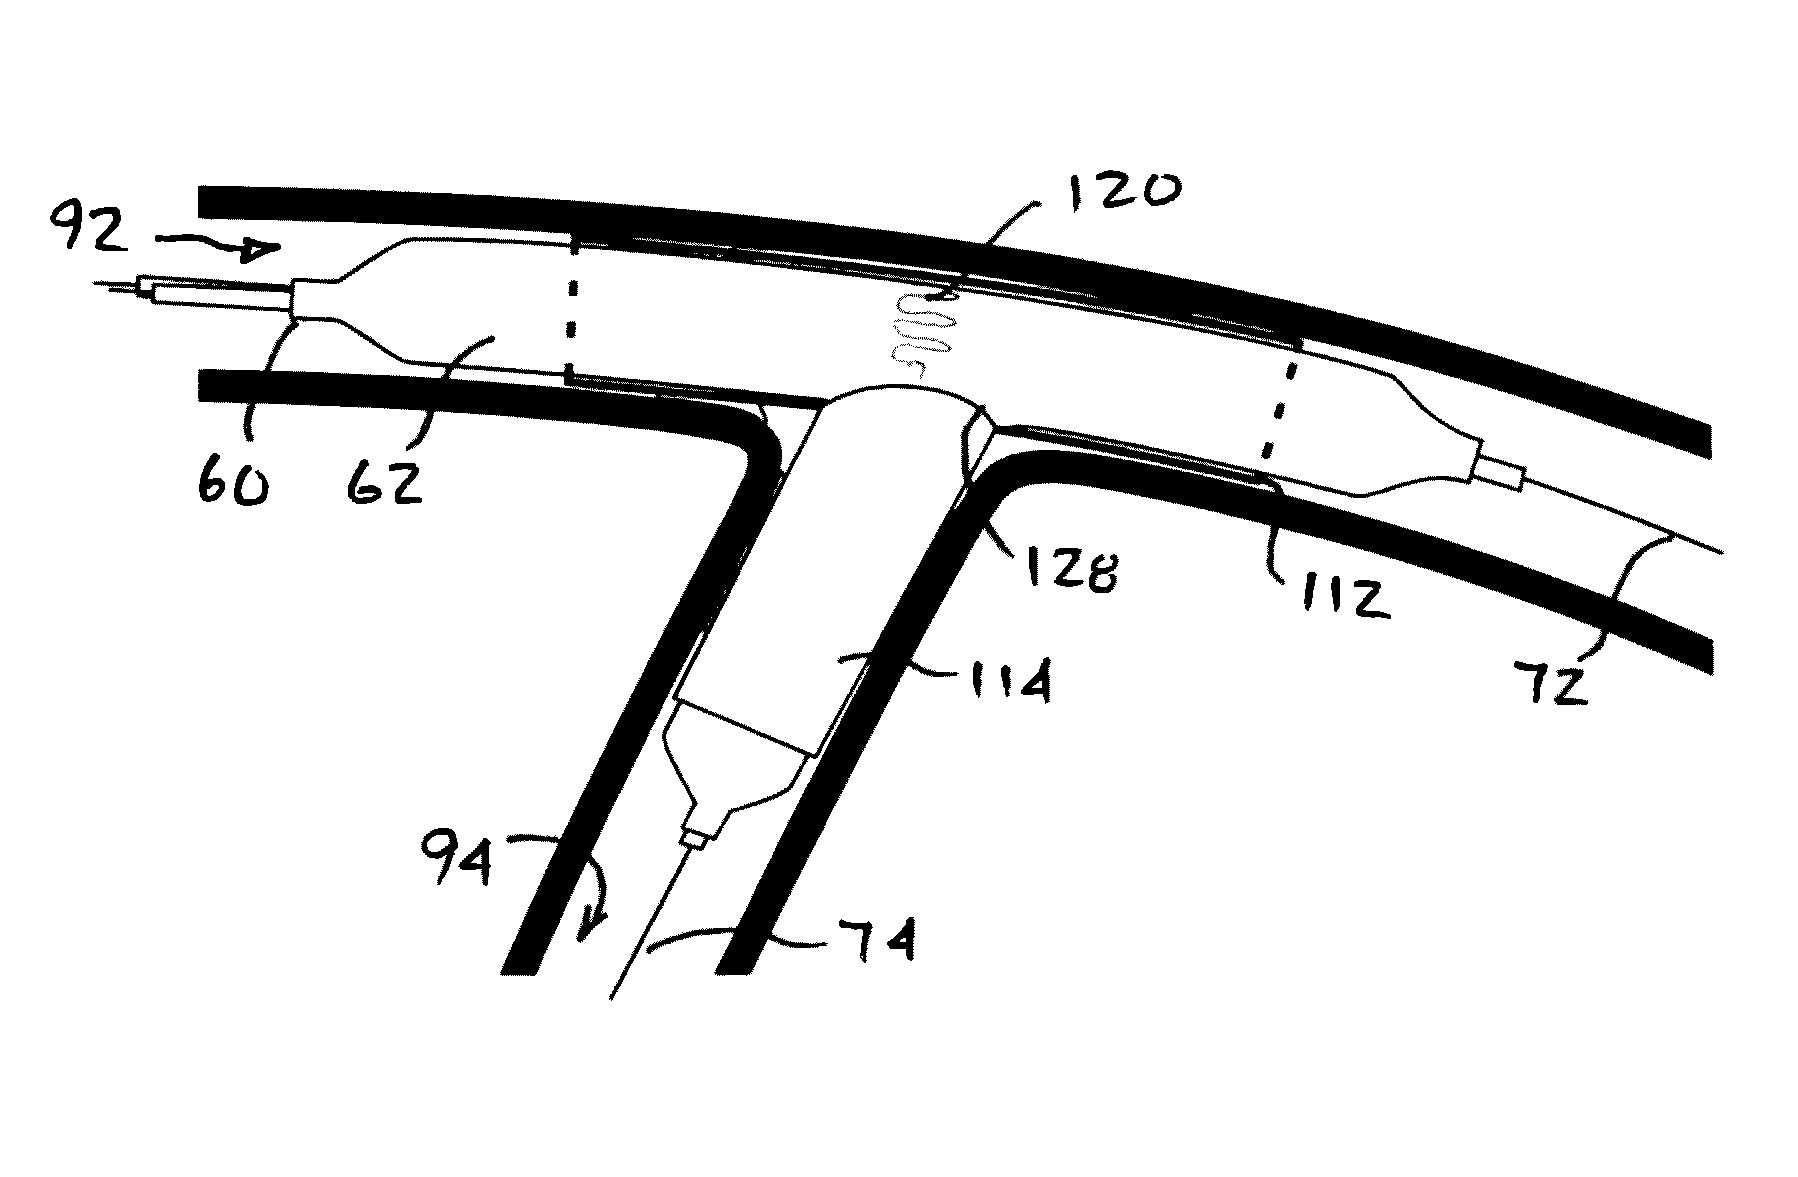 Stent system, deployment apparatus and method for bifurcated lesion